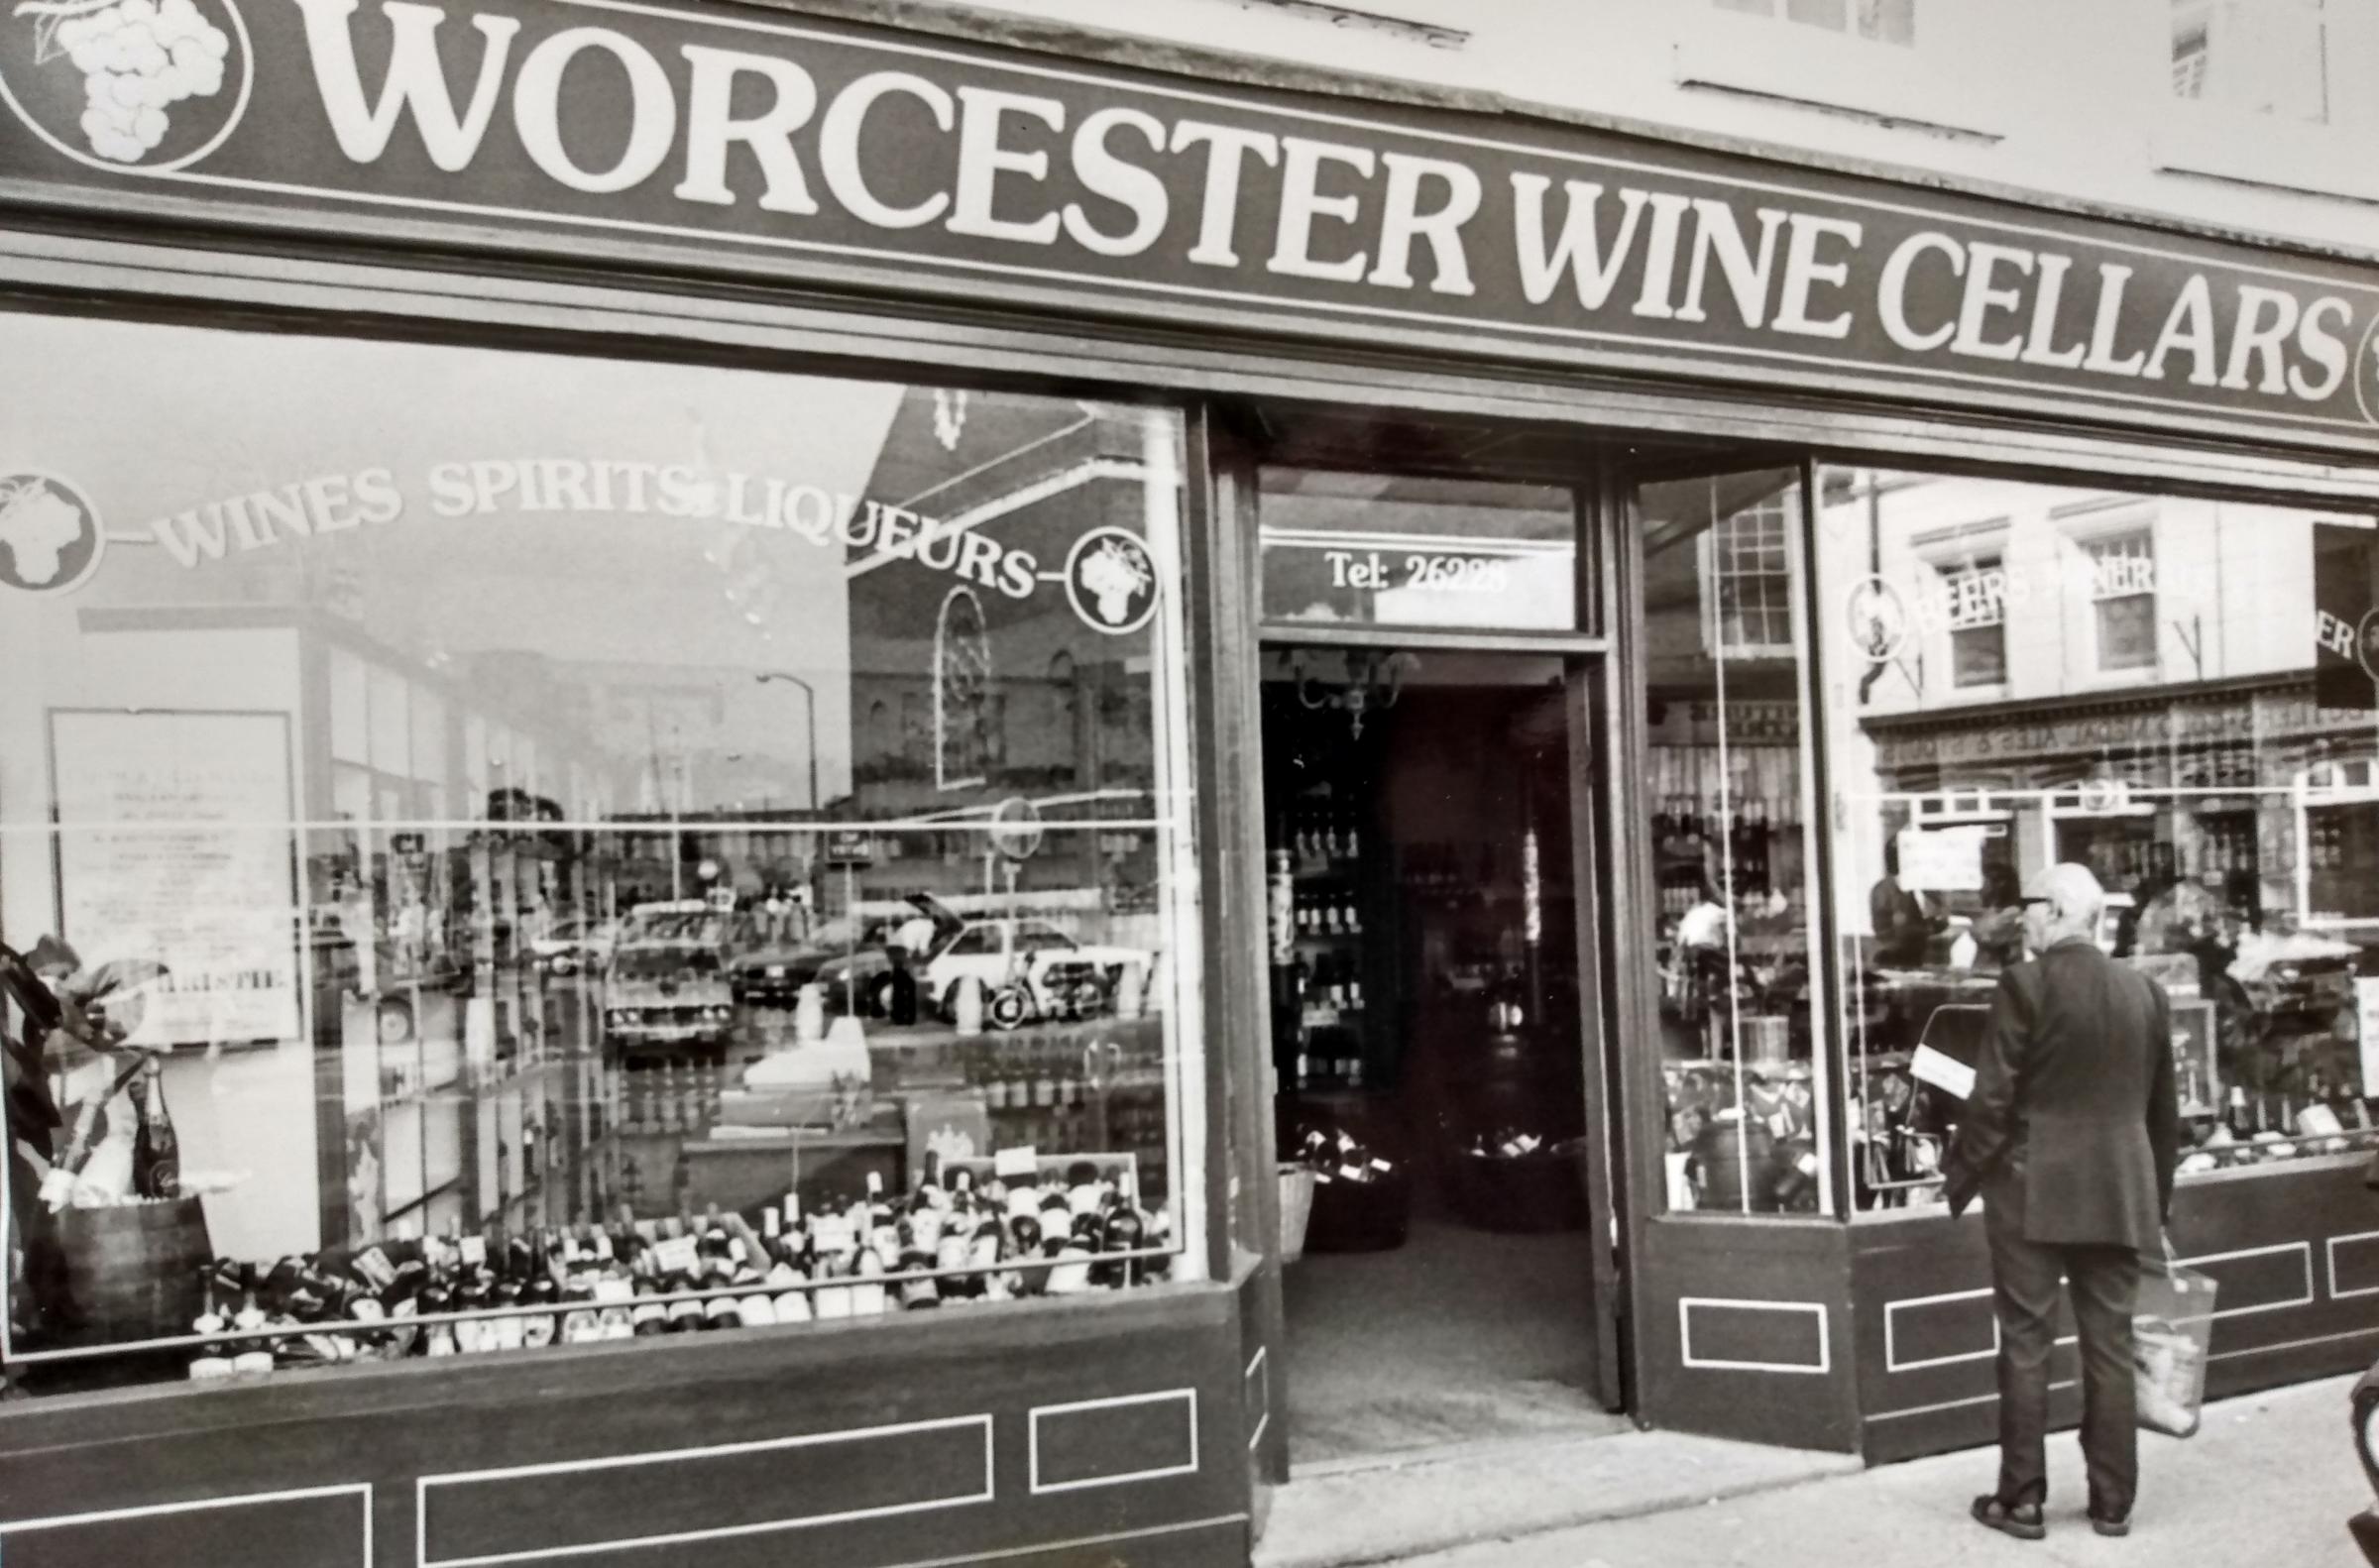 October 1985 and Worcester Wine Cellars was a new kid on the block. Did you ever pop in to pick up a bottle or two?